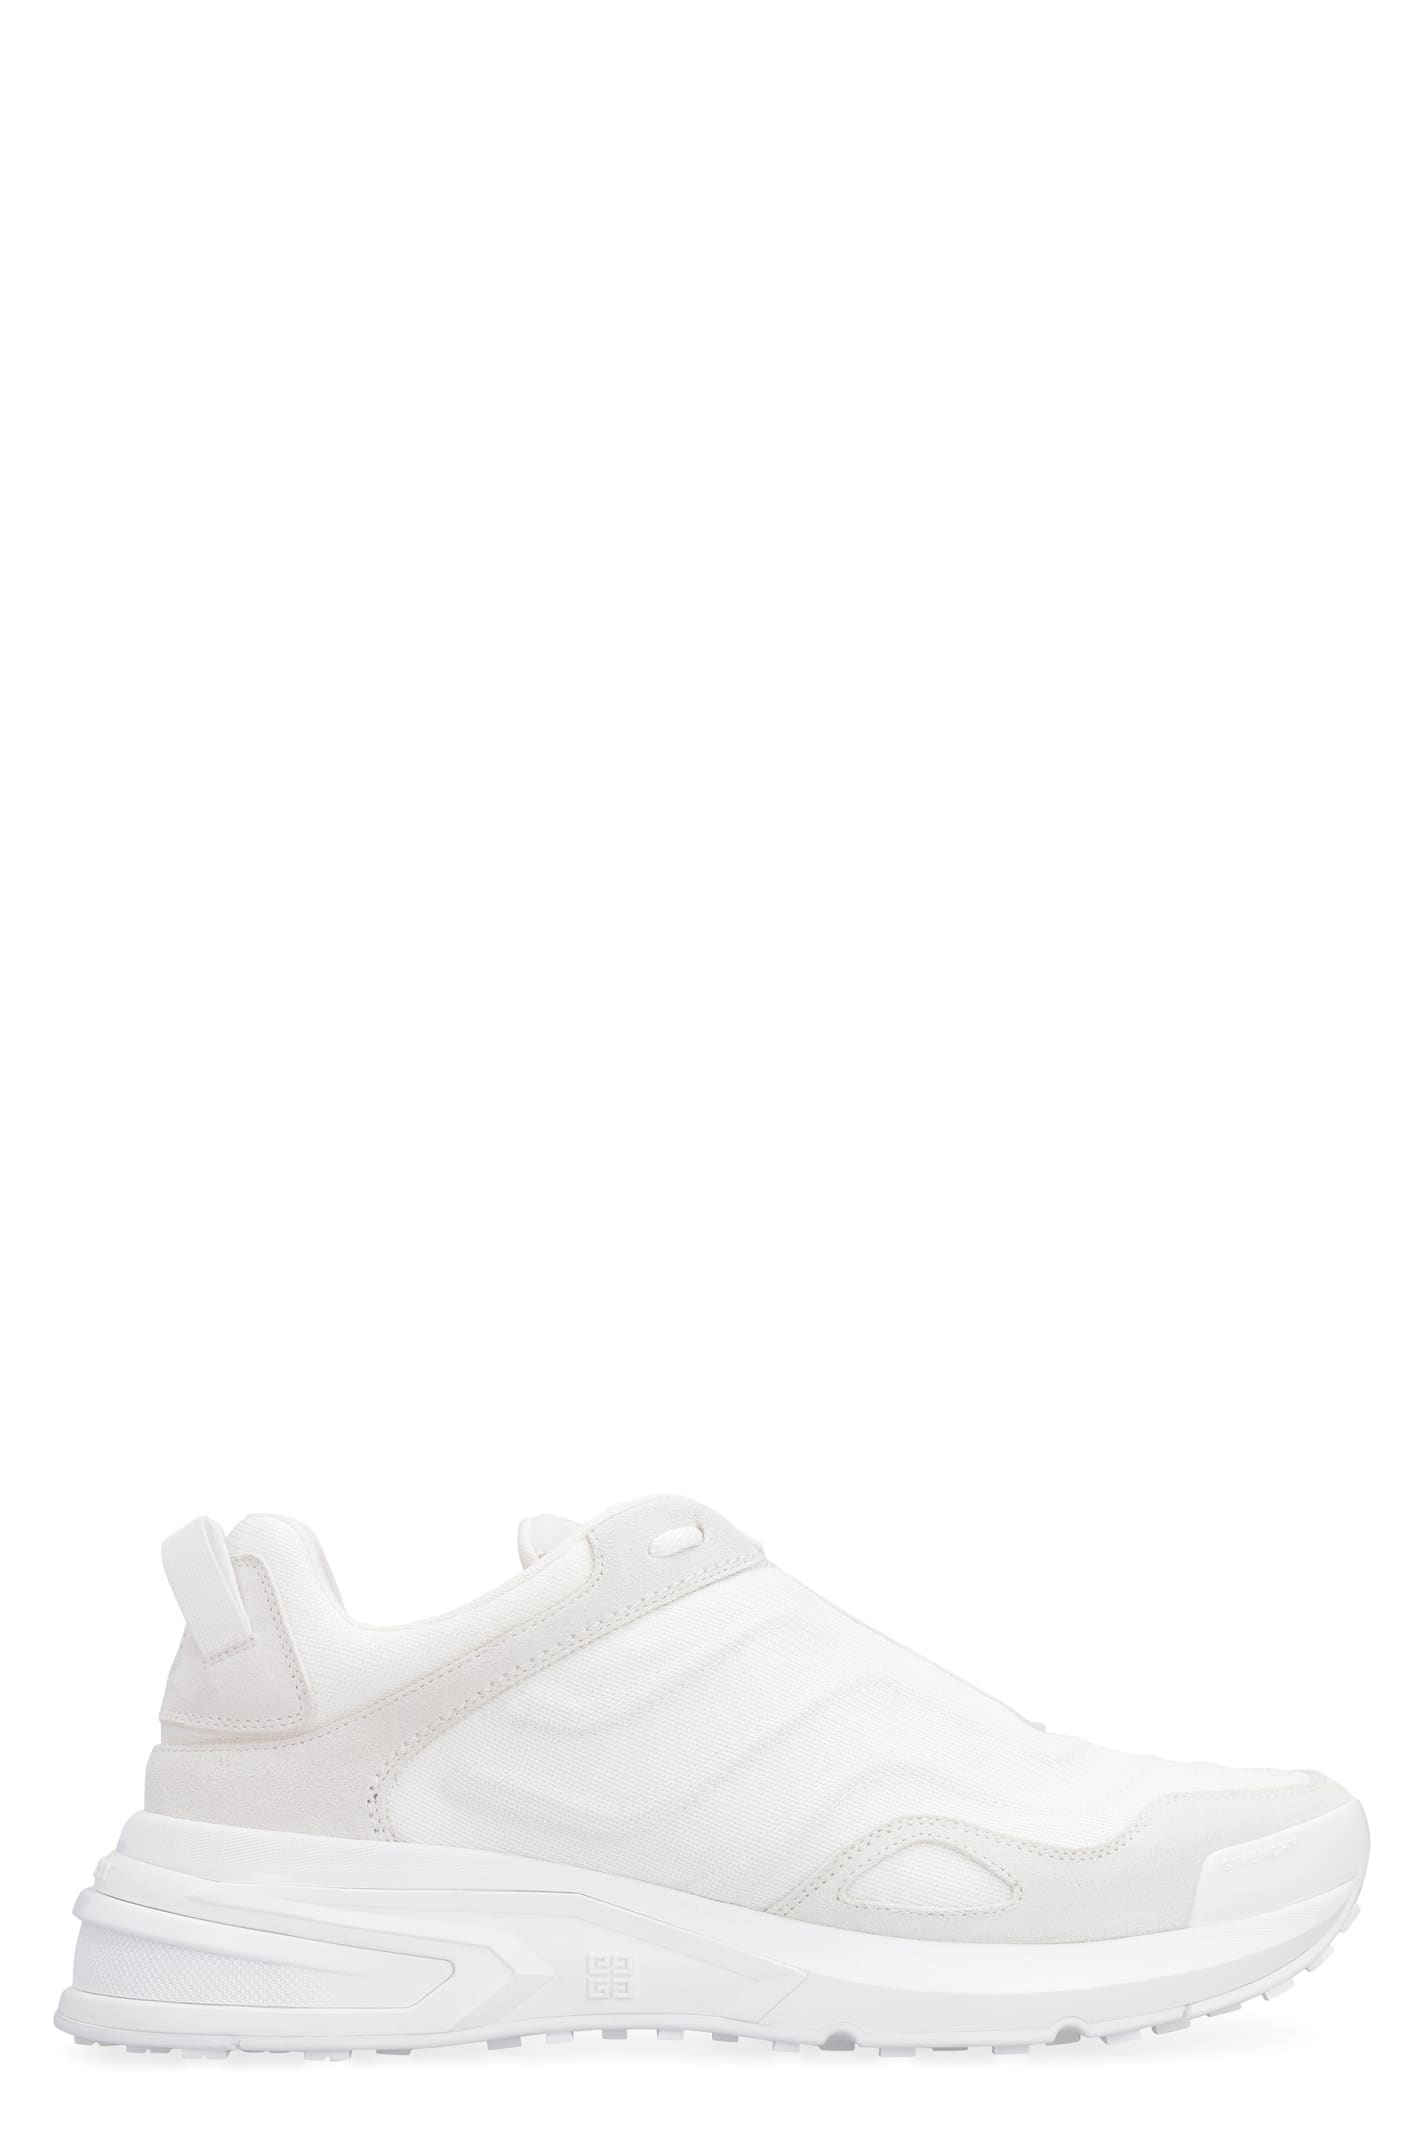 Givenchy Giv 1 Low-top Sneakers